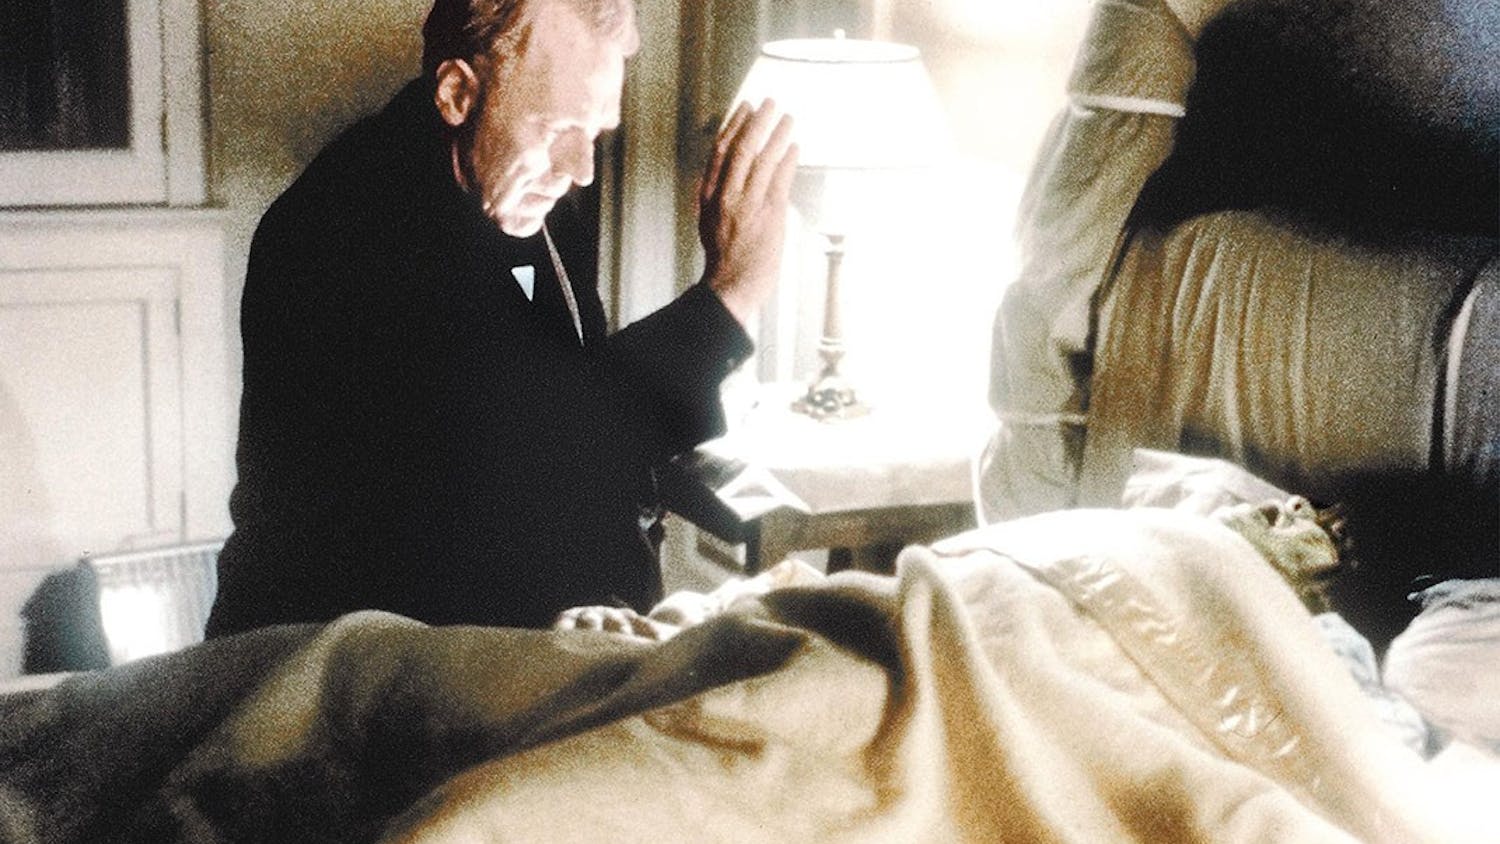 Father Merrin, played by Max von Sydow, seeks the inner demon in Regan (Linda Blair) in the 1973 film “The Exorcist.”